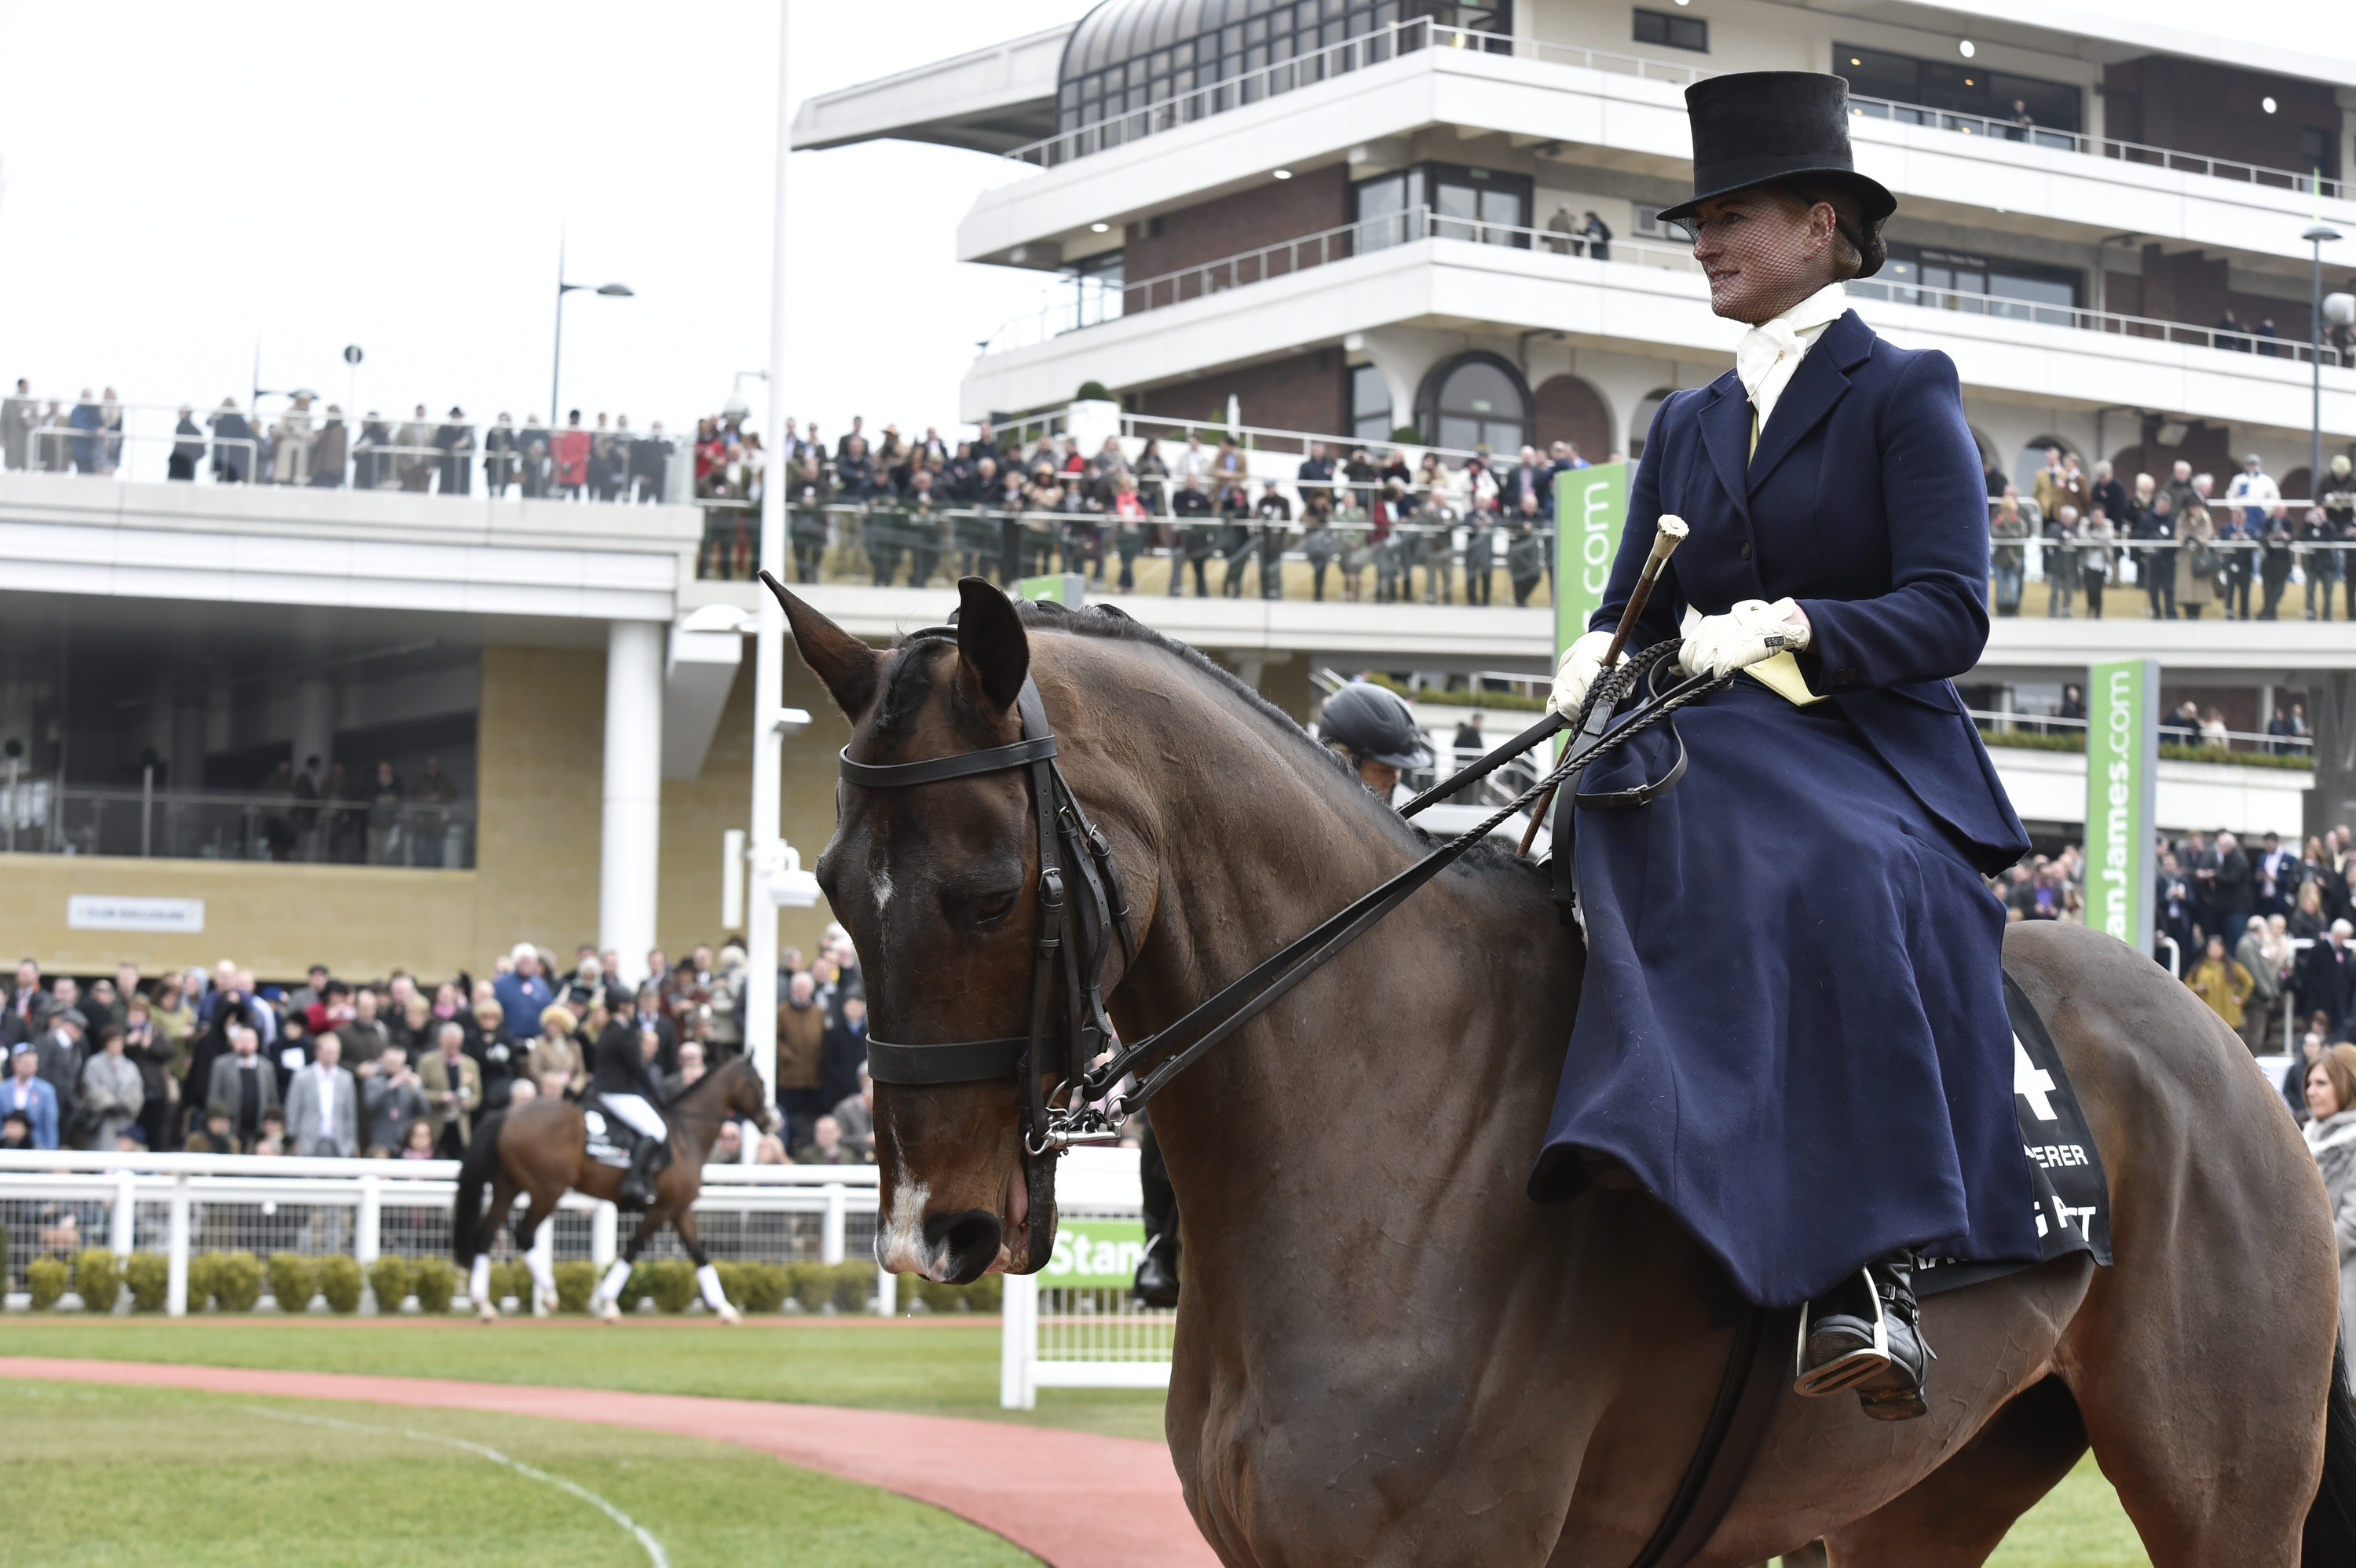 The Peter O’Sullevan Charitable Trust to sponsor RoR parades - Former Arkle Chase winner Forpadydeplasterer, seen ridden here side-saddle by Joanne Quirke, in the RoR Parade at the 2016 Cheltenham Festival